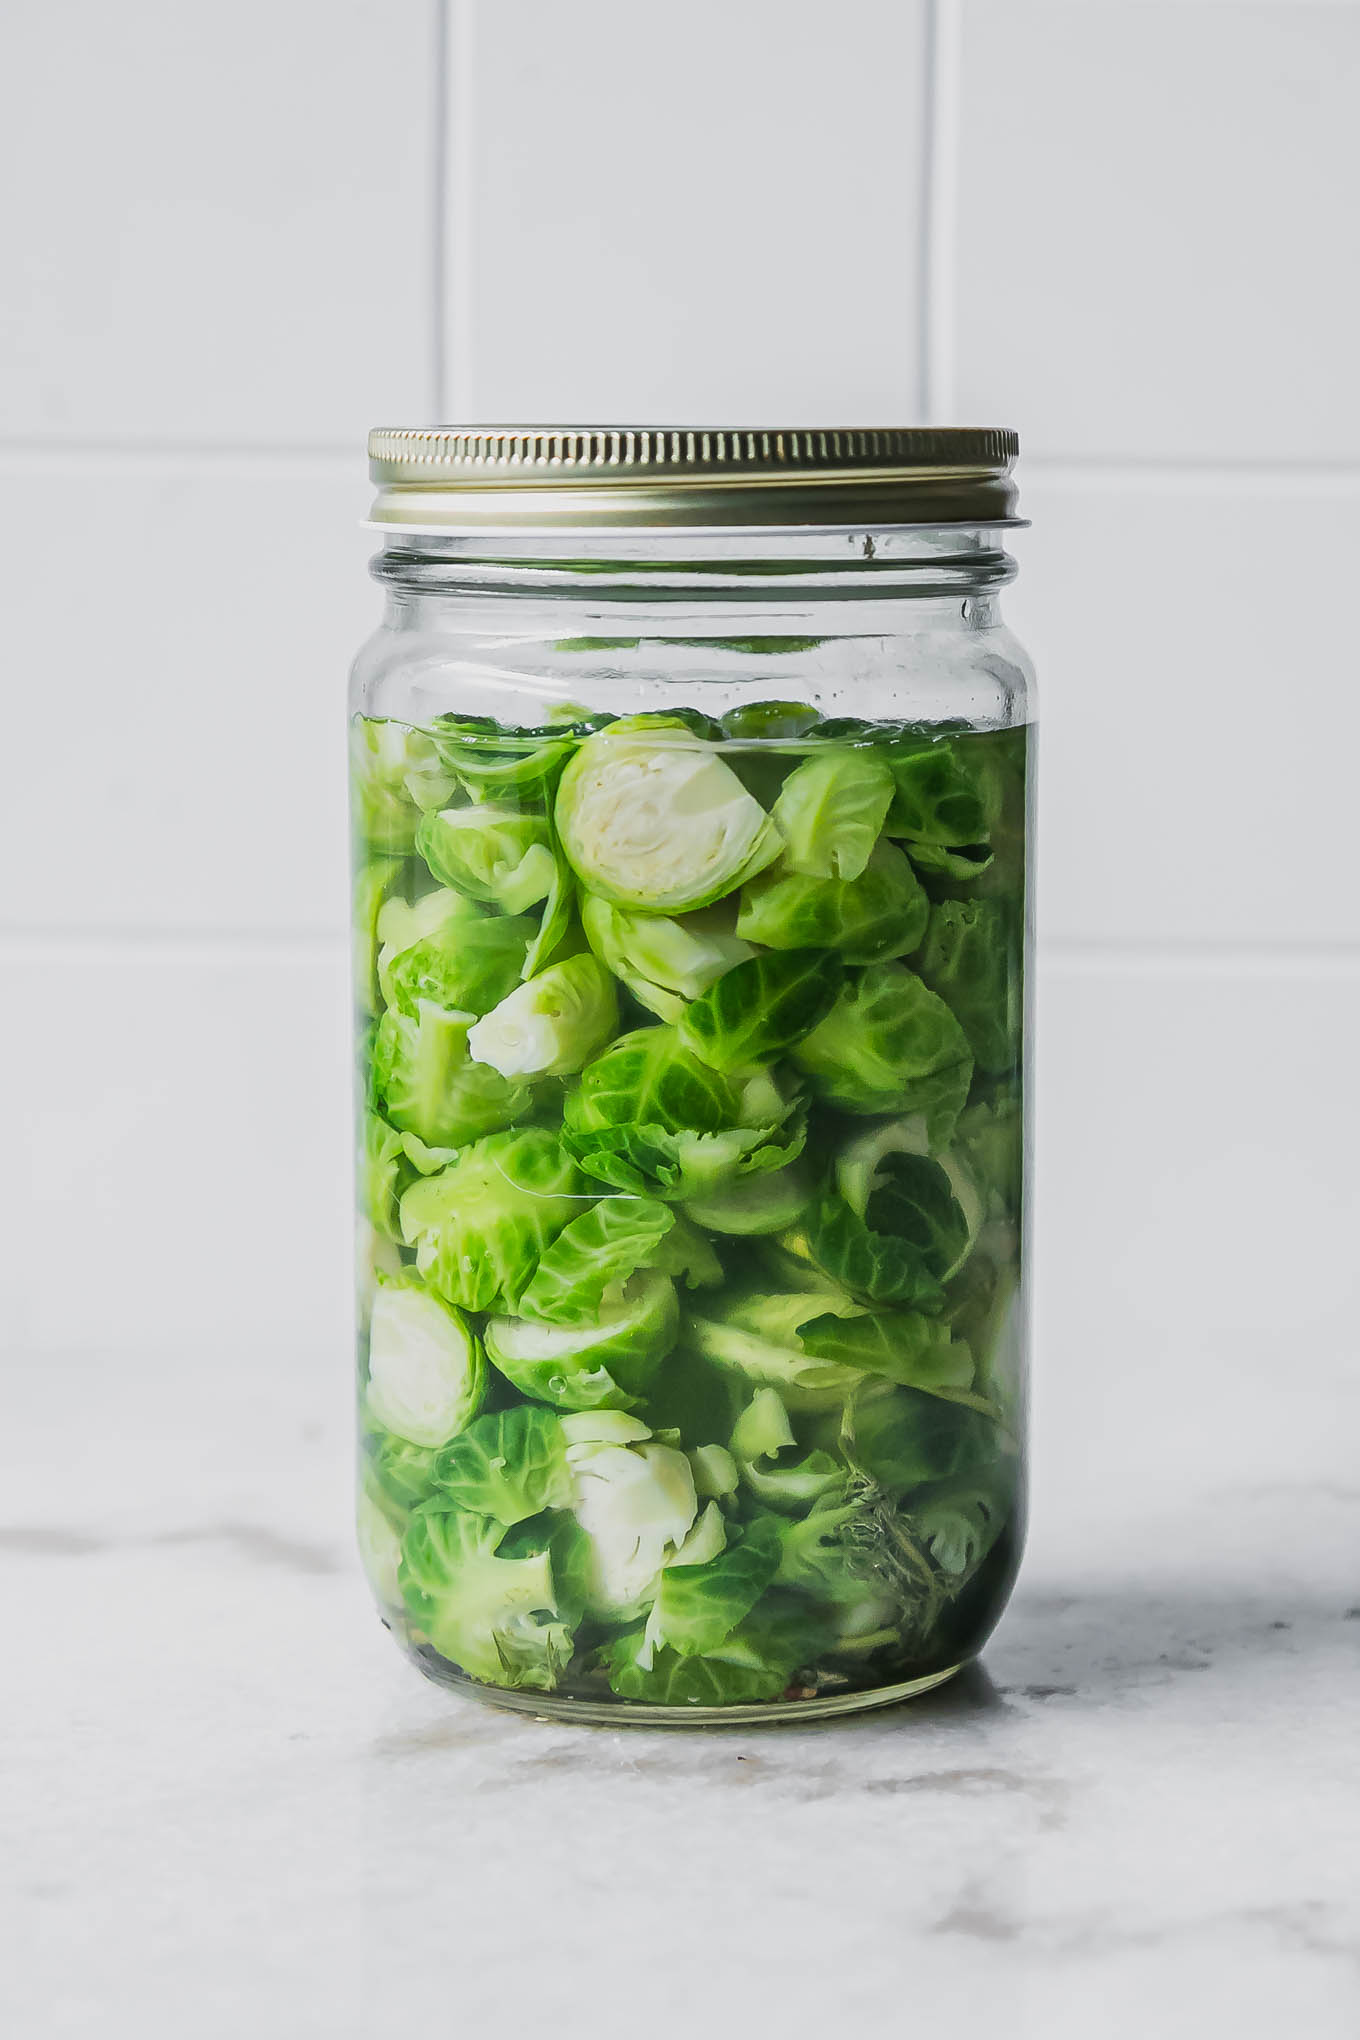 pickled brussels sprouts in a jar on a white table